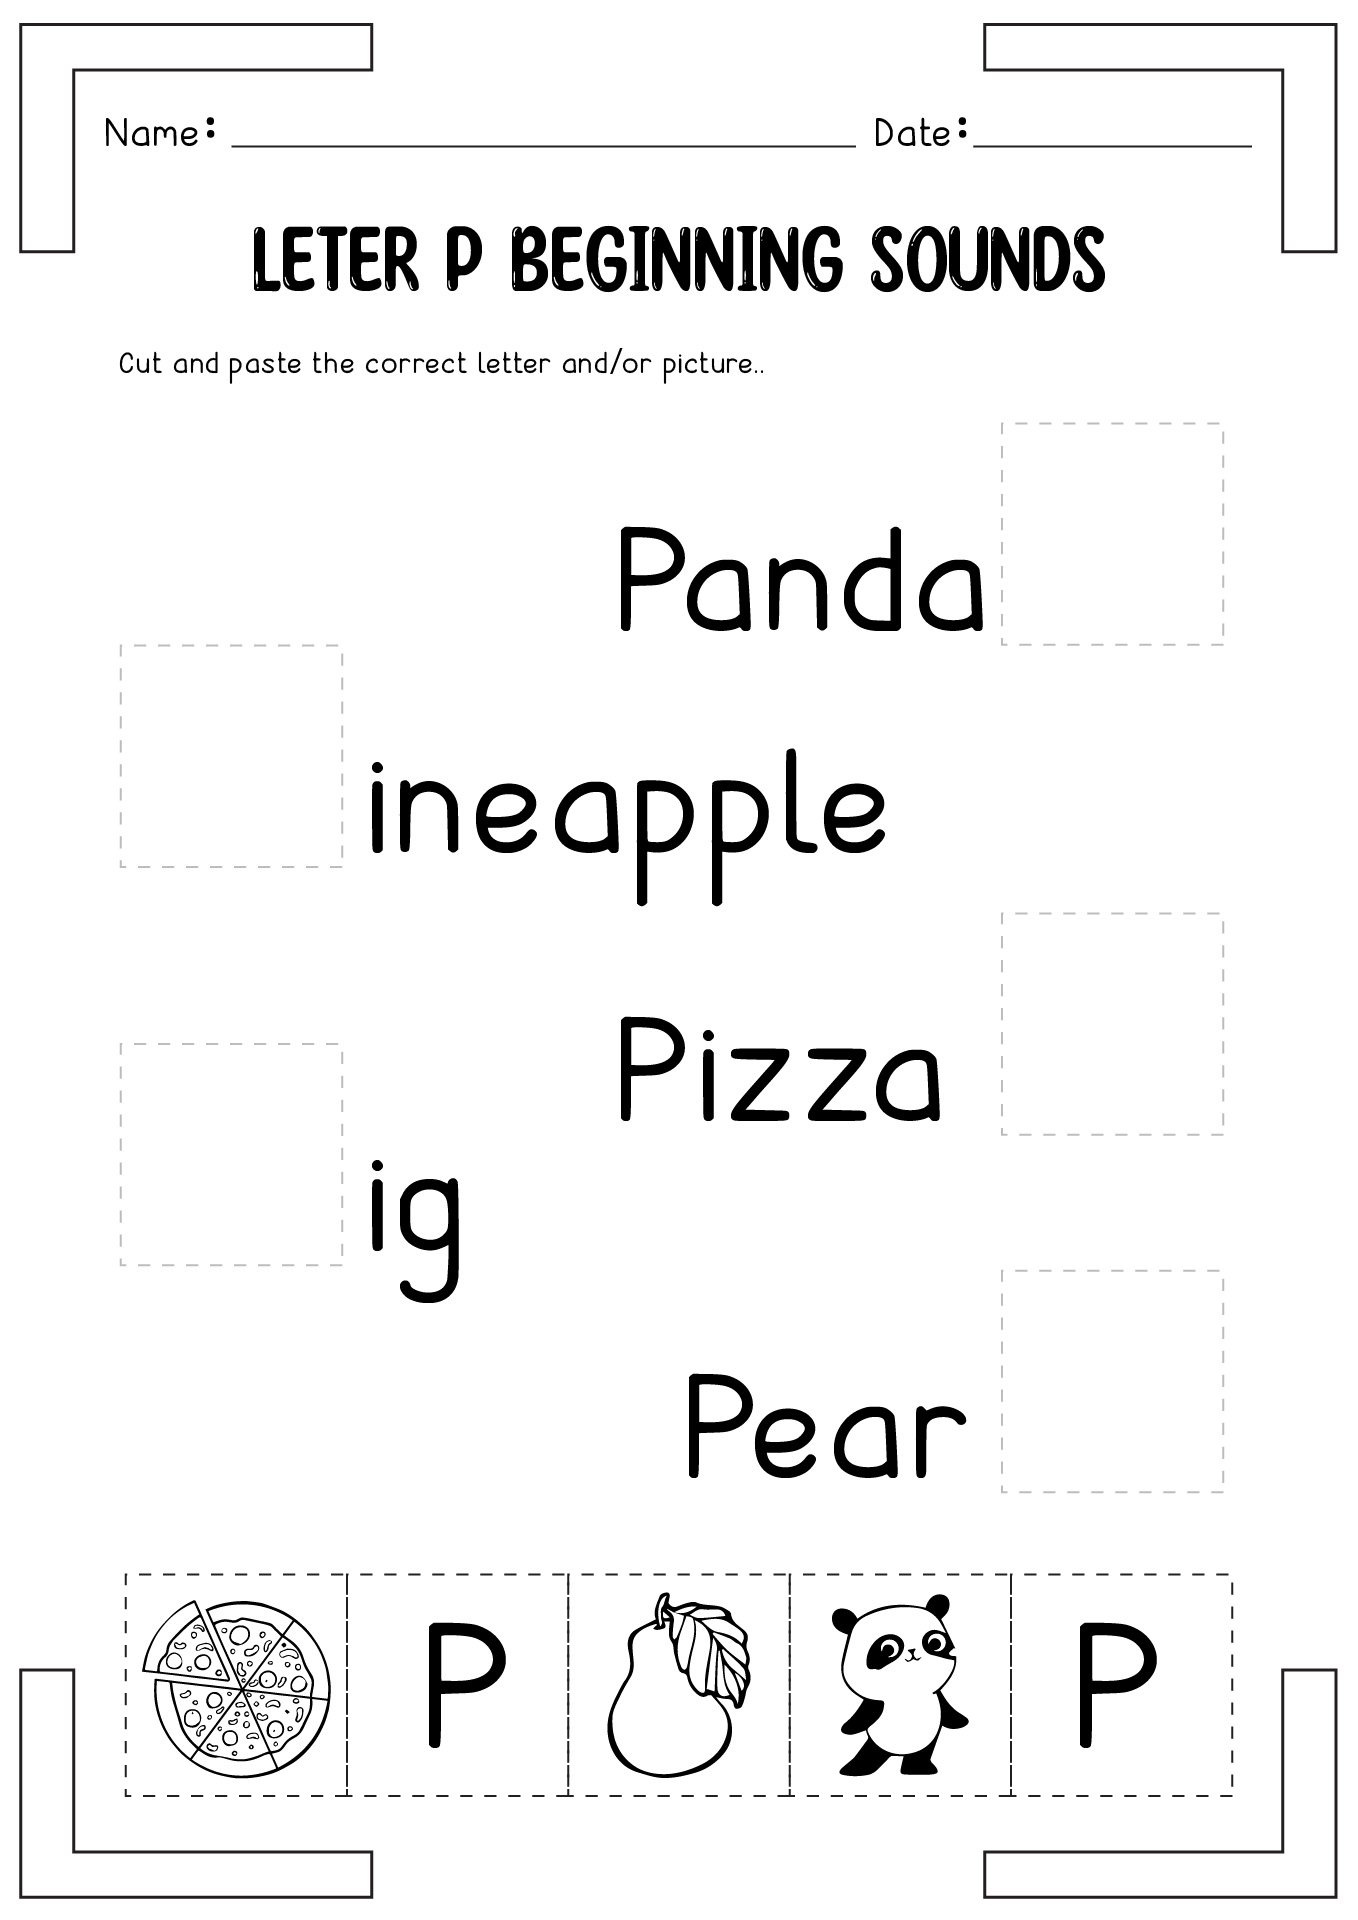 Letter P Beginning Sounds Cut and Paste